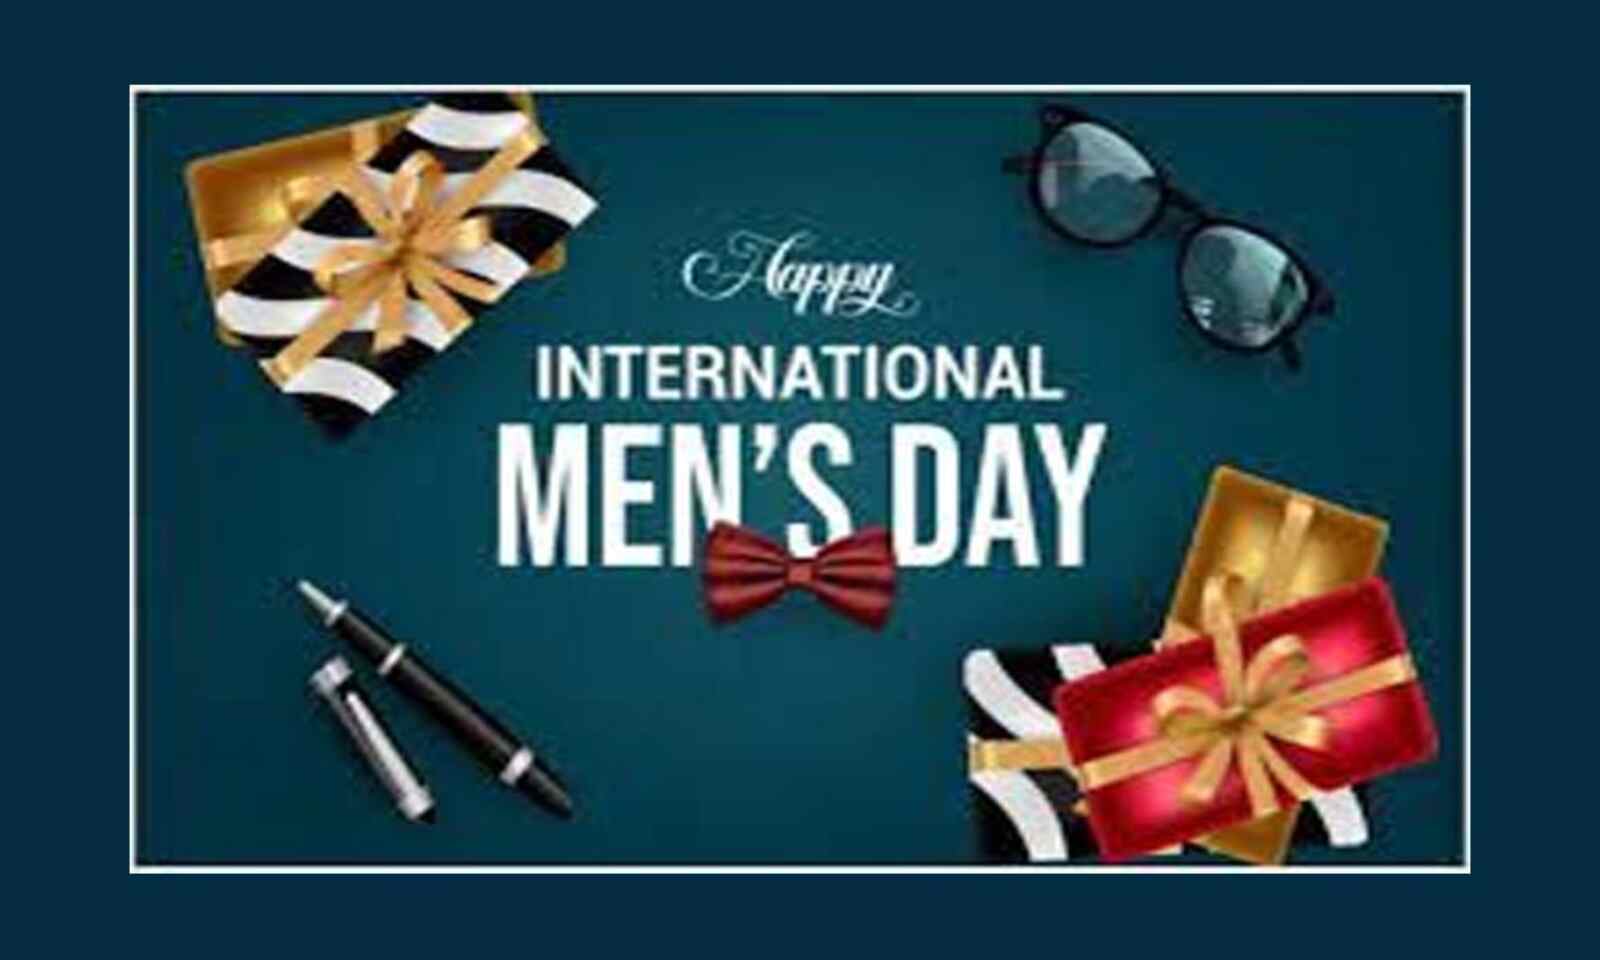 International Men's Day: Gift ideas, for the Special Man in your Life